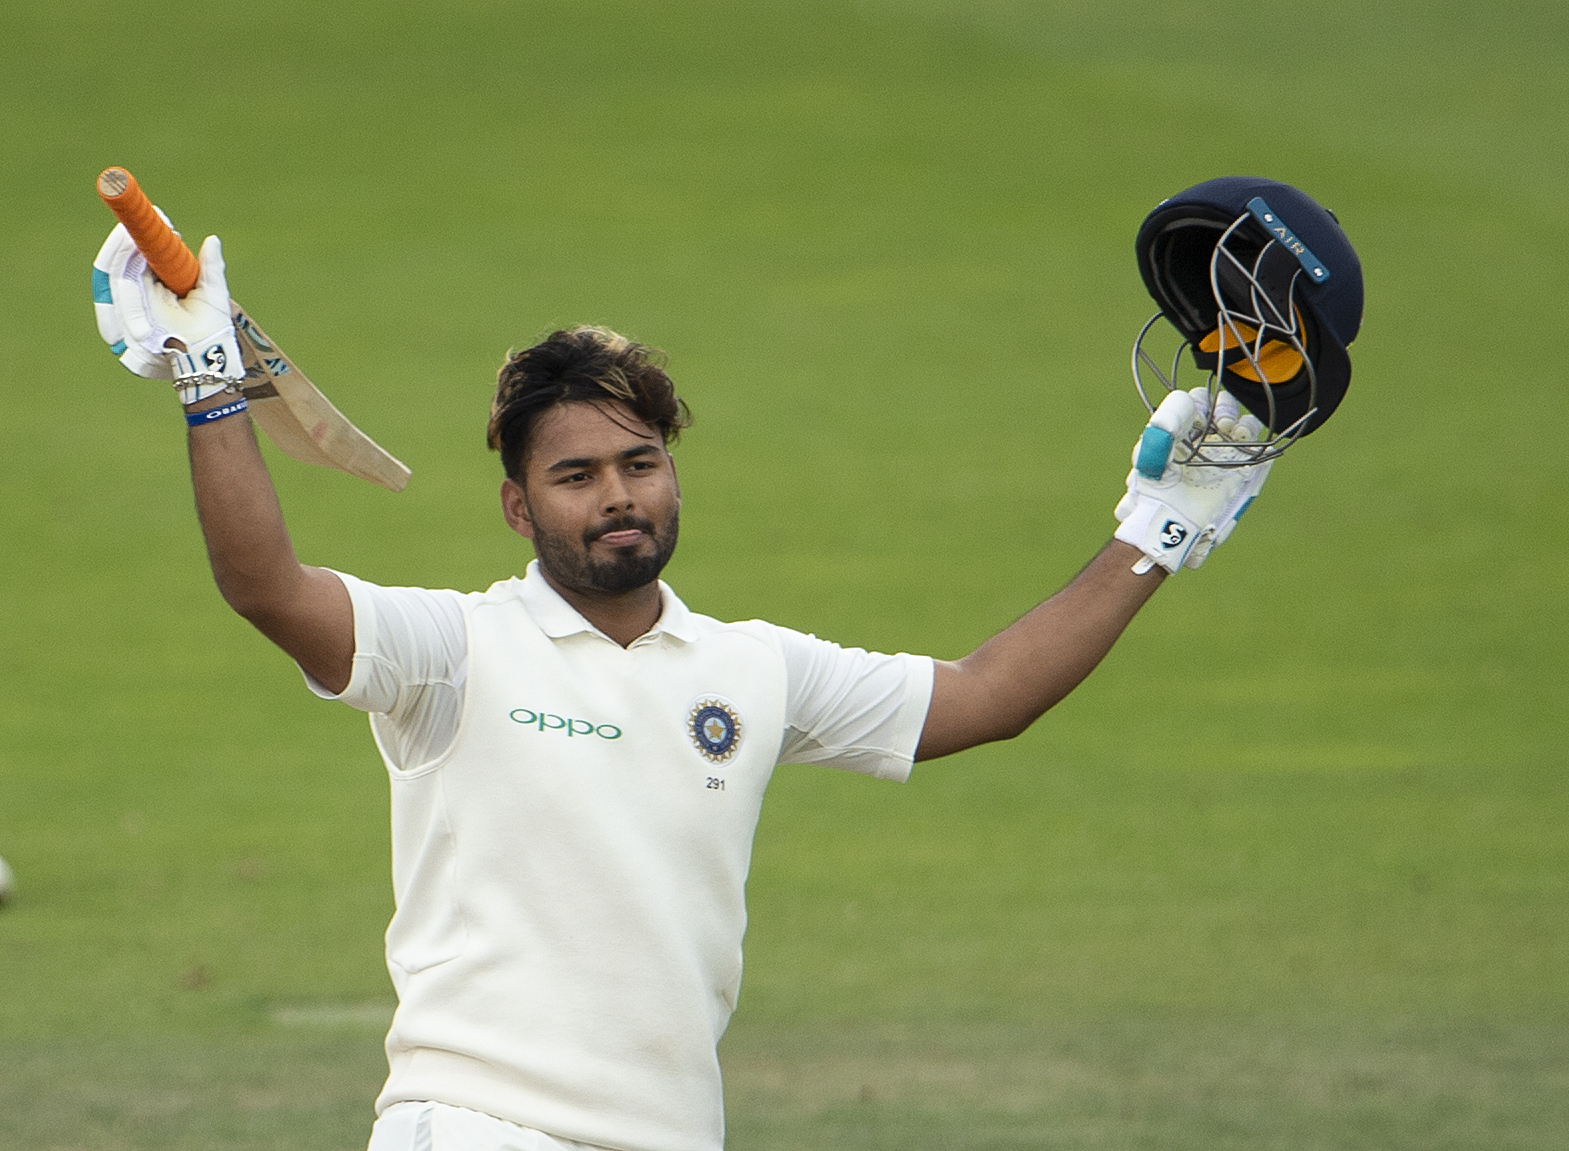 Rishabh Pant has improved as keeper but still needs to work on footwork against pacers, suggests Ajay Ratra